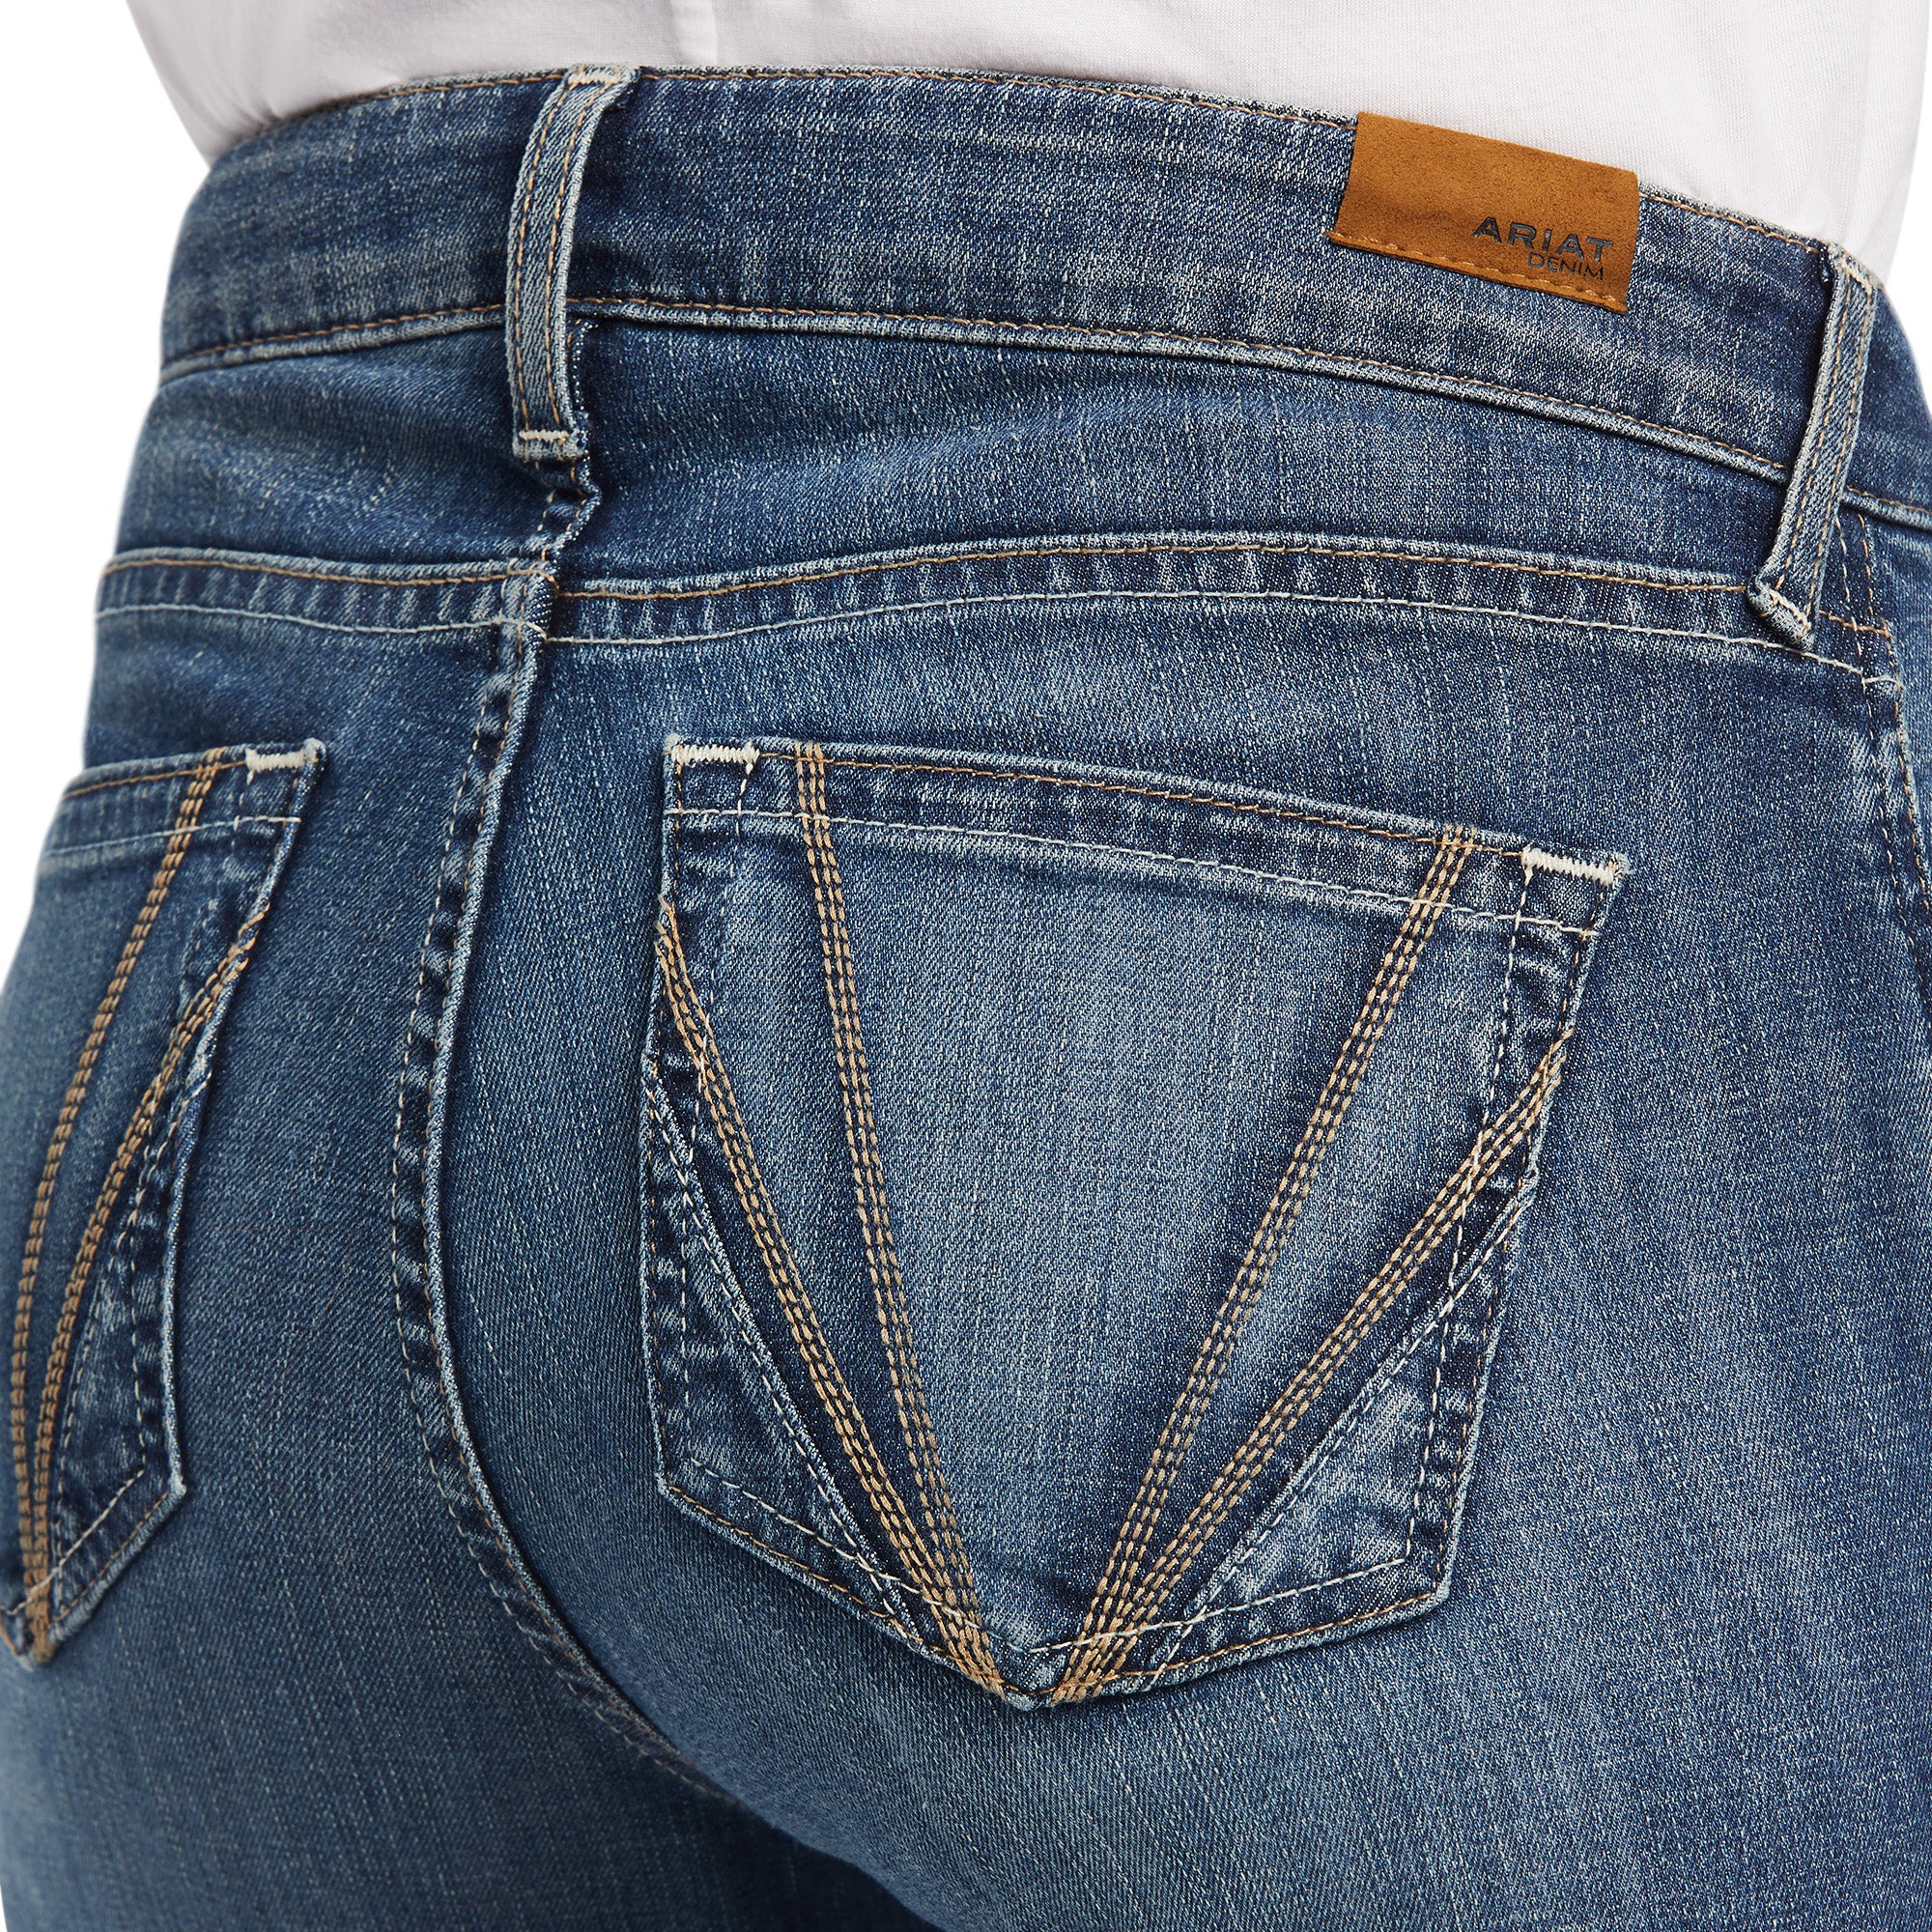 Ethical Australian Made Clothing Brands Justice Denim - The Green Hub